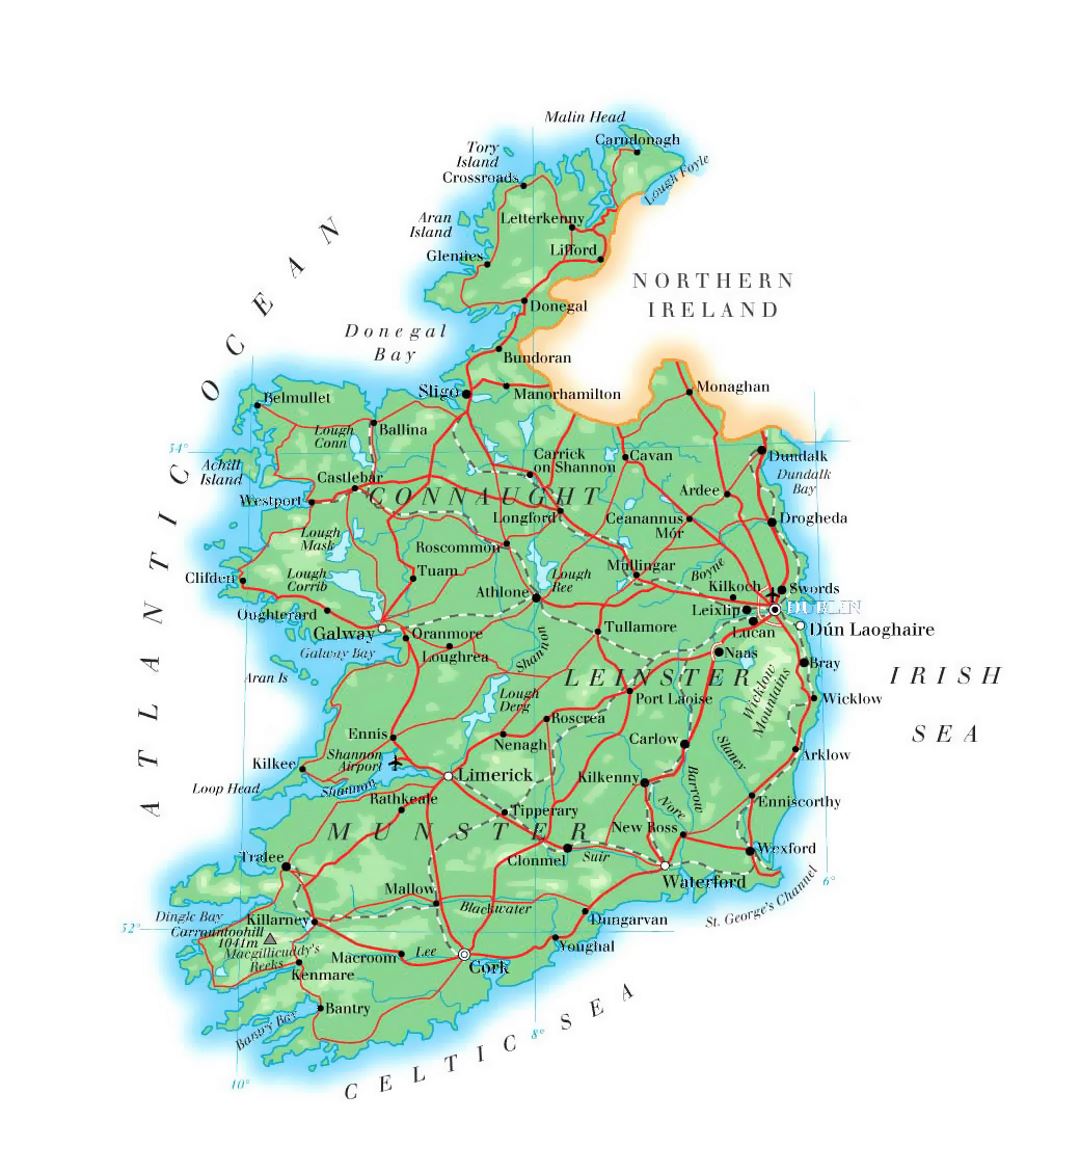 Detailed elevation map of Ireland with roads, cities and airports